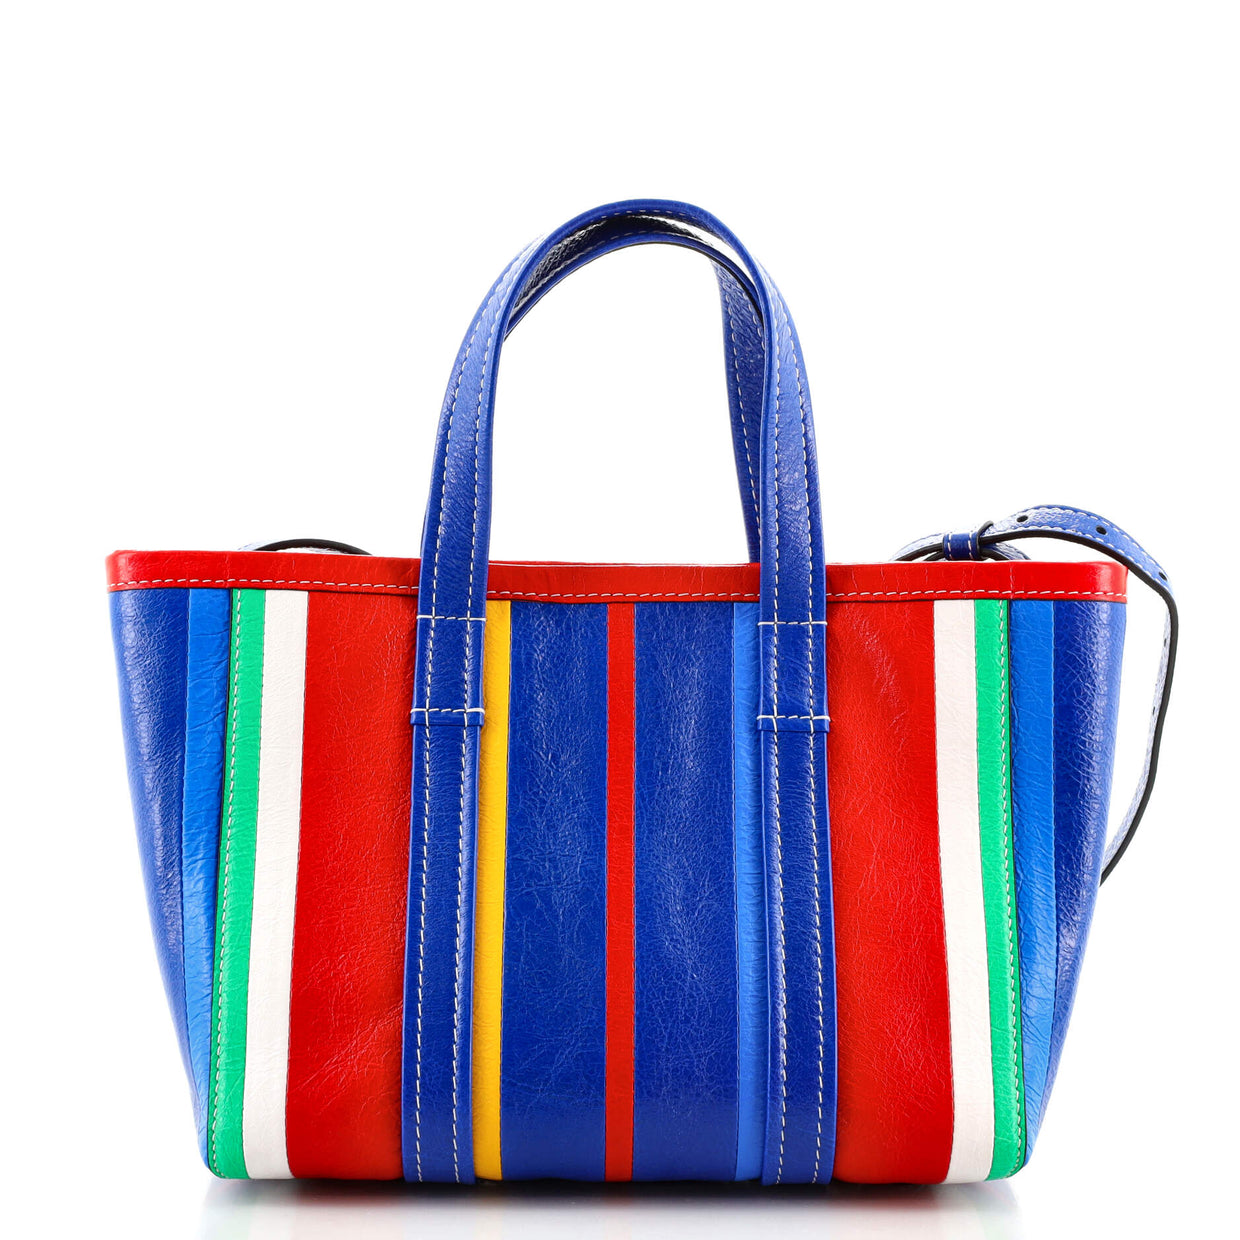 Balenciaga Barbes East-West Shopper Tote Striped Leather Small ...